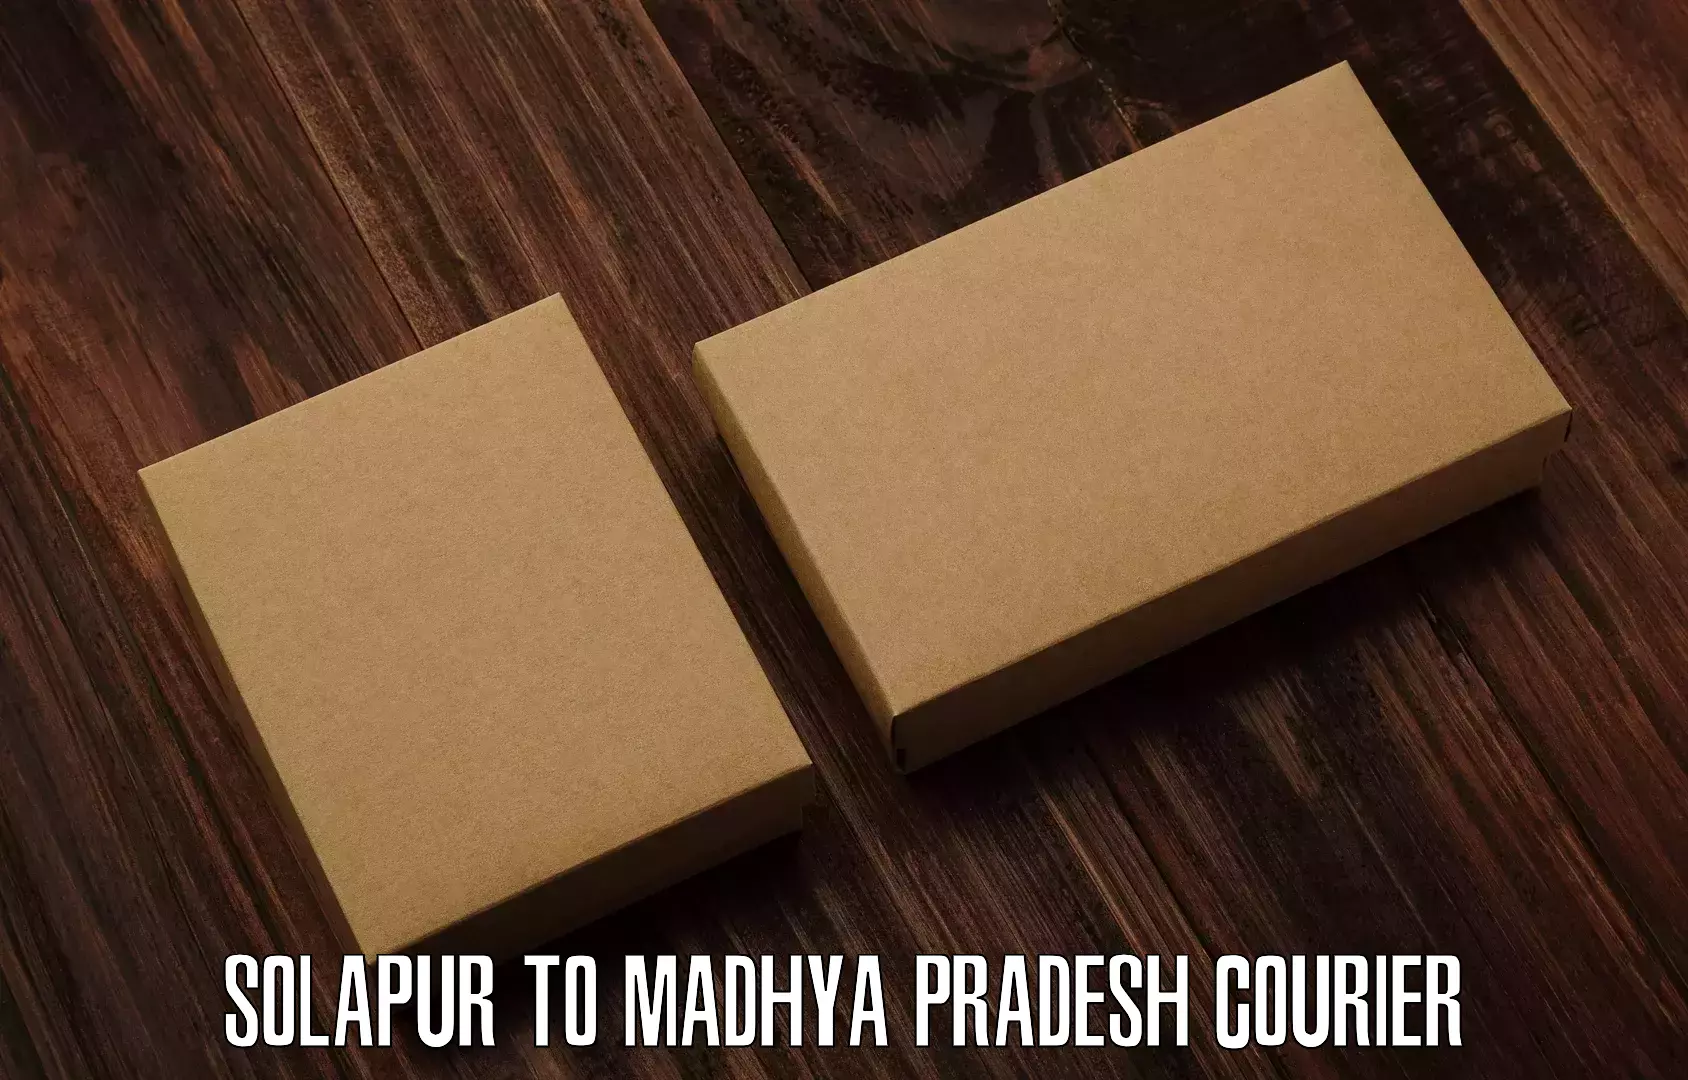 State-of-the-art courier technology Solapur to Madhya Pradesh